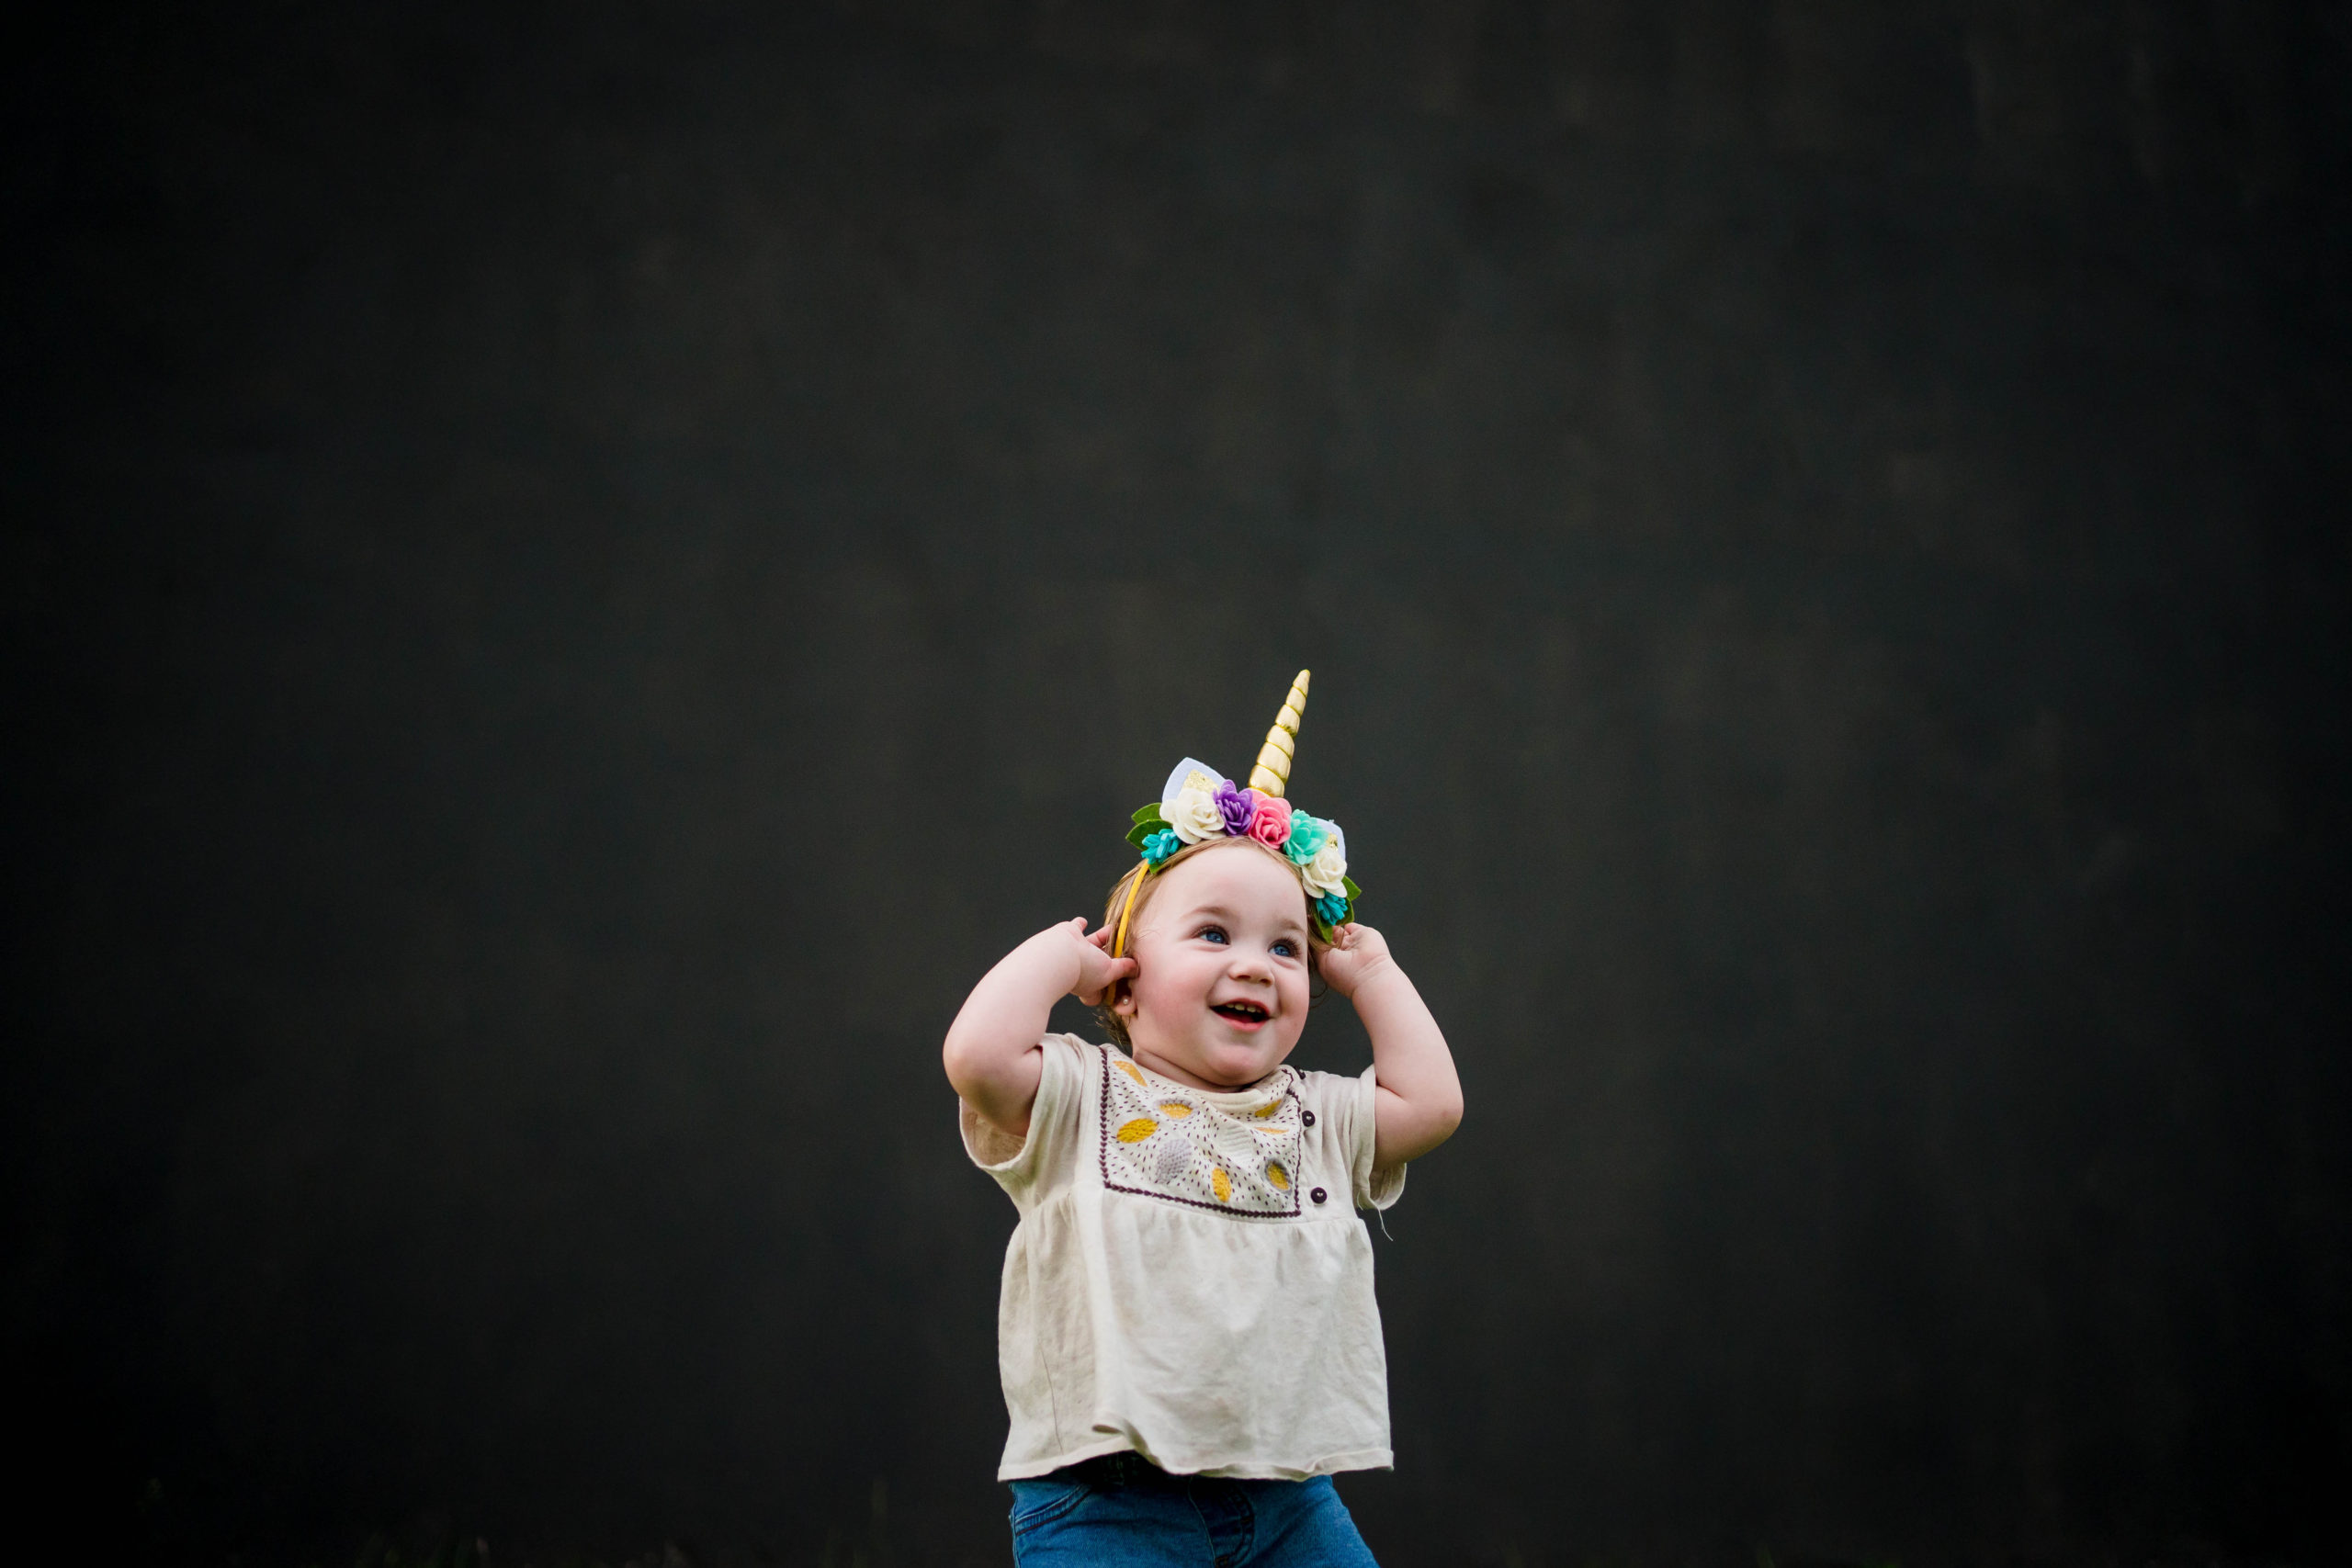 5 Reasons to hire a photographer for your kids bday party